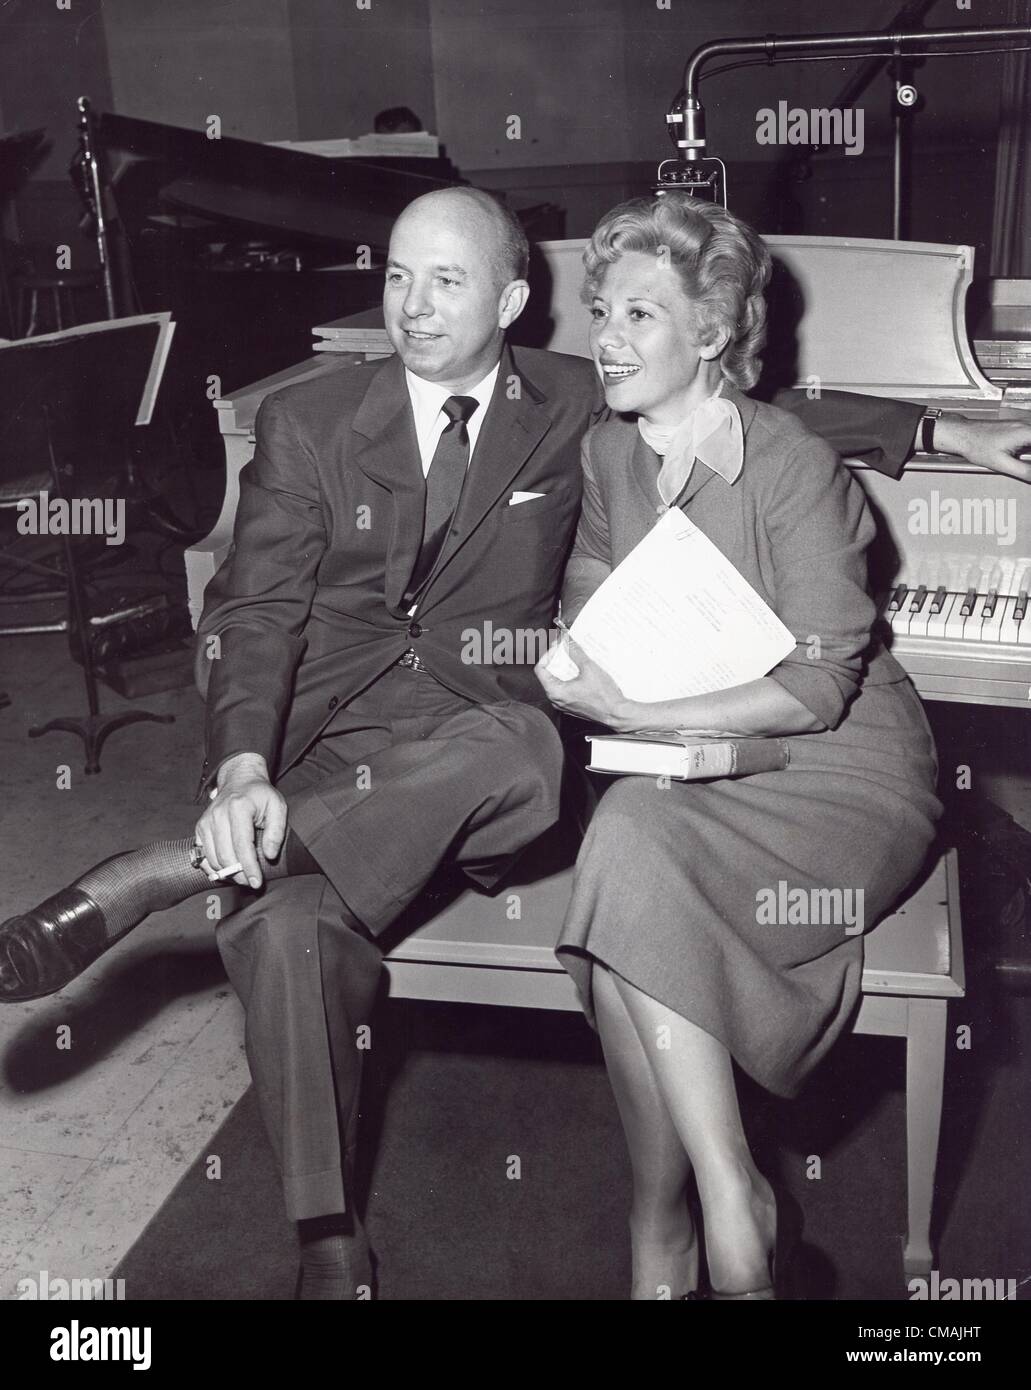 Jimmy Van Heusen and Eleanor Rooseveltcirca 1950s** A.H. - Image 0337_2869, Most iconic images of the 20th century